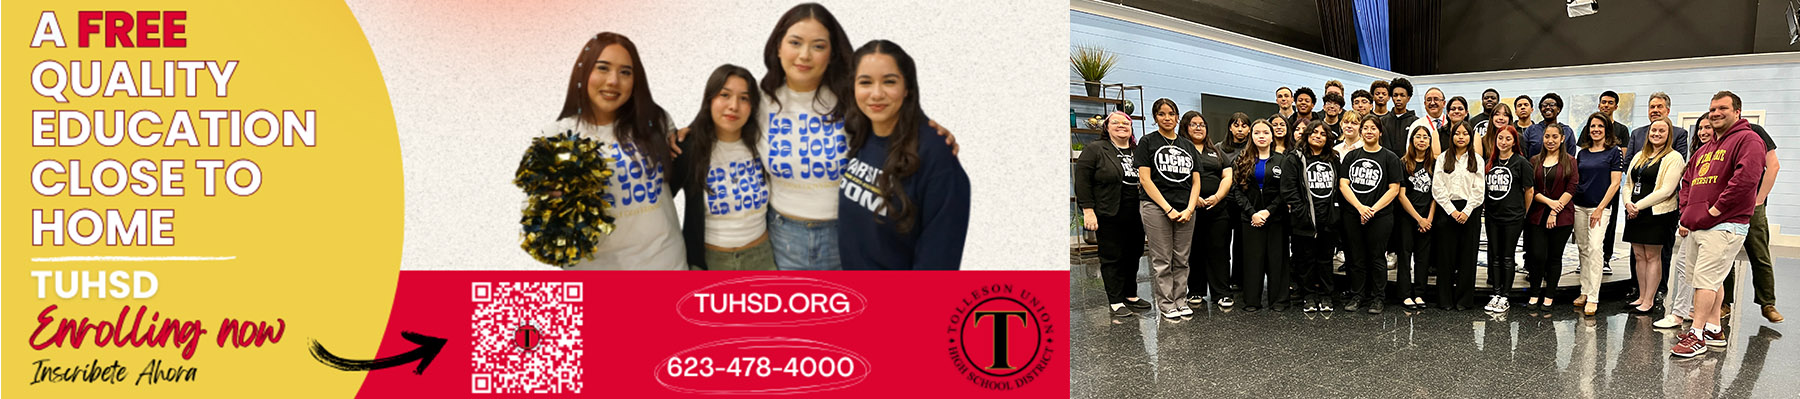 A free quality education close to home - TUHSD Enrolling now | Inscribete Ahora - tuhsd.org - 623-478-4000 | Group of students wearing black t-shirts